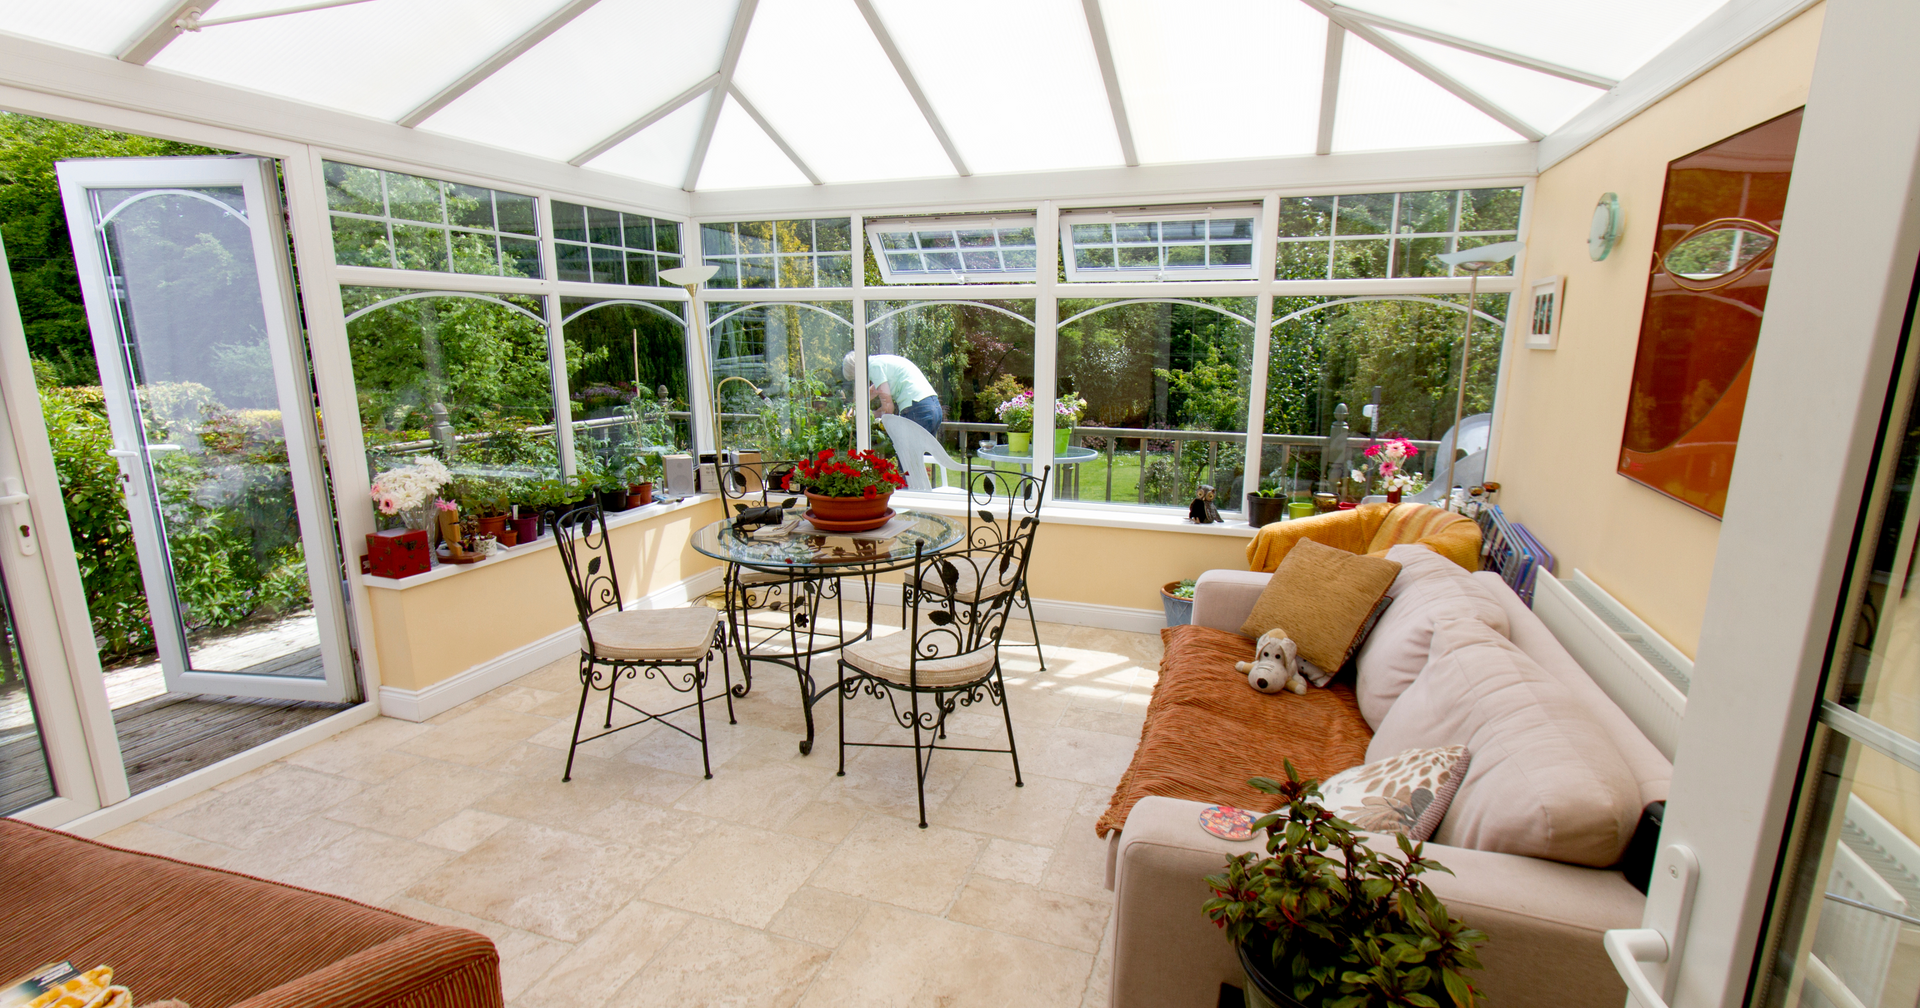 Illuminating Your Home's Value with a Sunroom